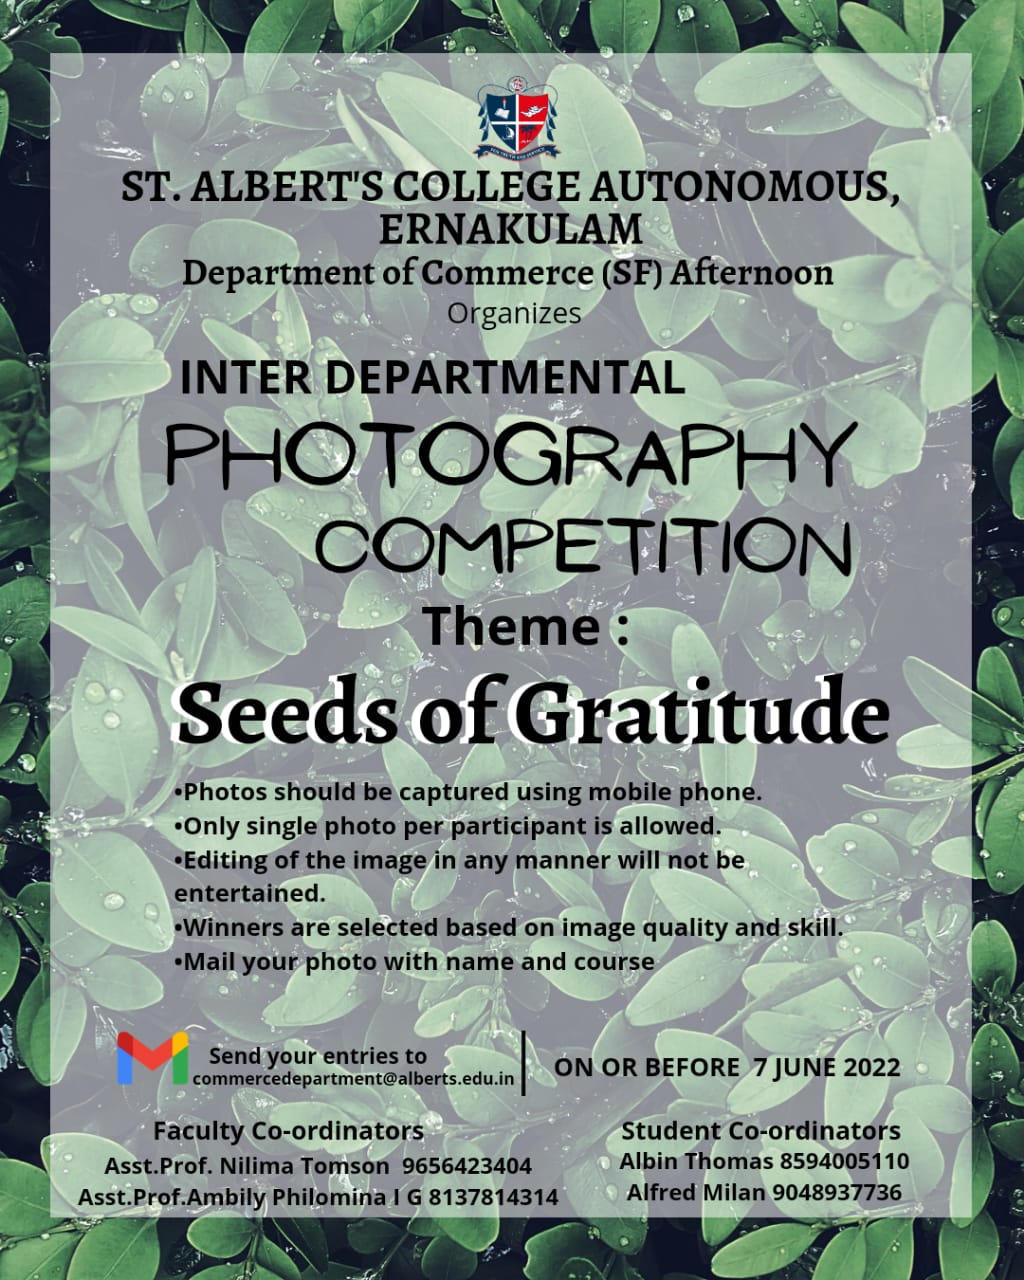 World Environment Day 2022 -Photography Competition-“Seeds of Gratitude”